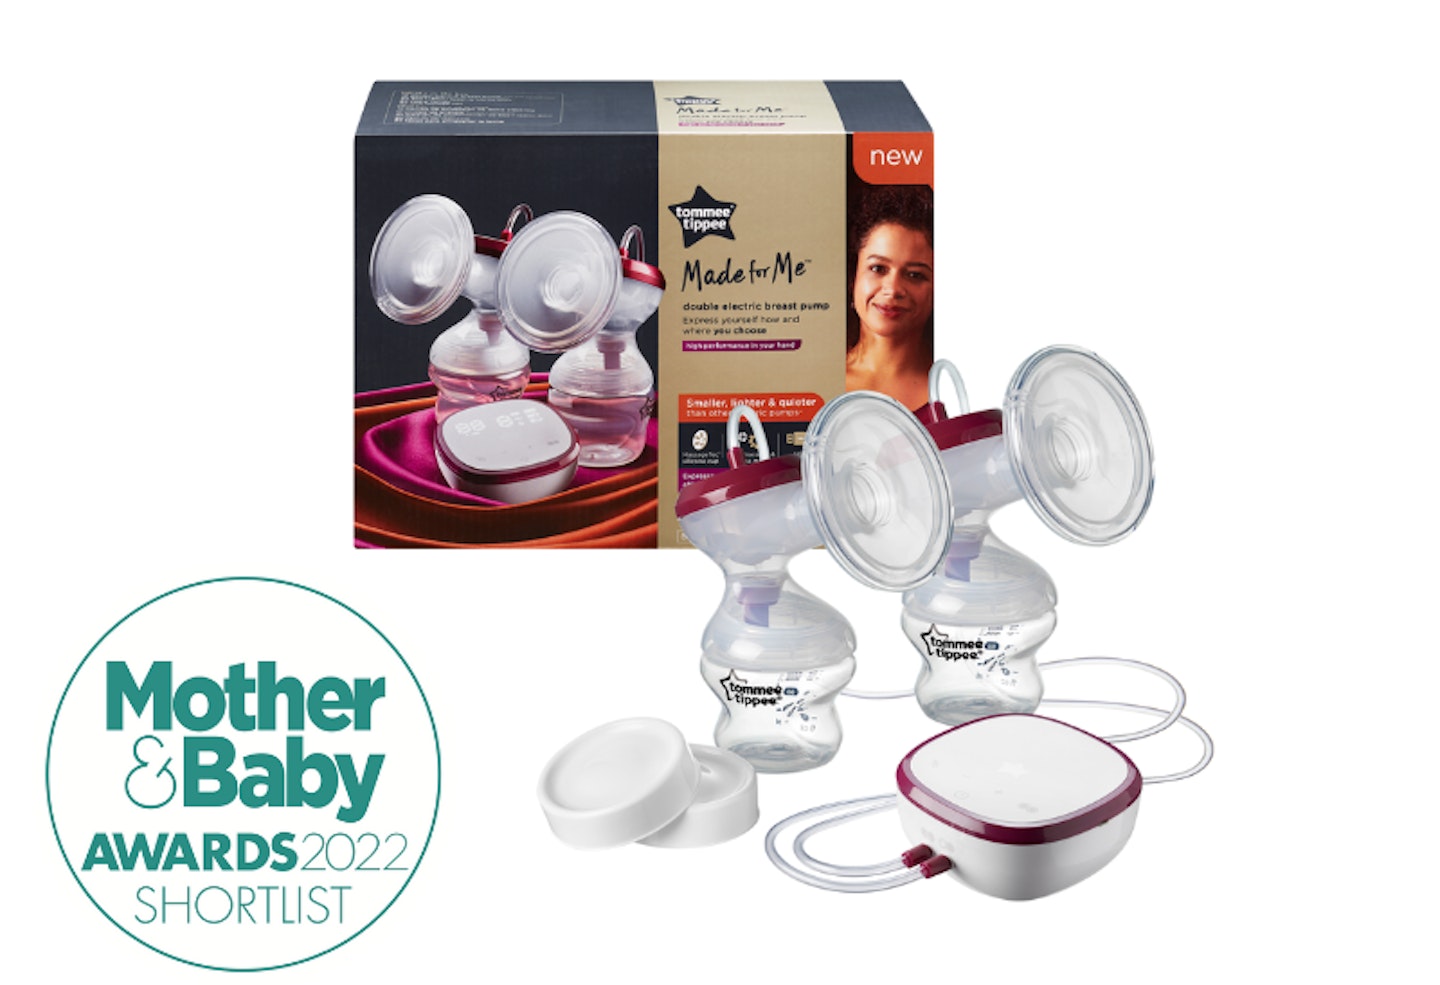 https://images.bauerhosting.com/affiliates/sites/12/motherandbaby/2021/09/Tommee-Tippee-Made-for-Me-Award.png?auto=format&w=1440&q=80